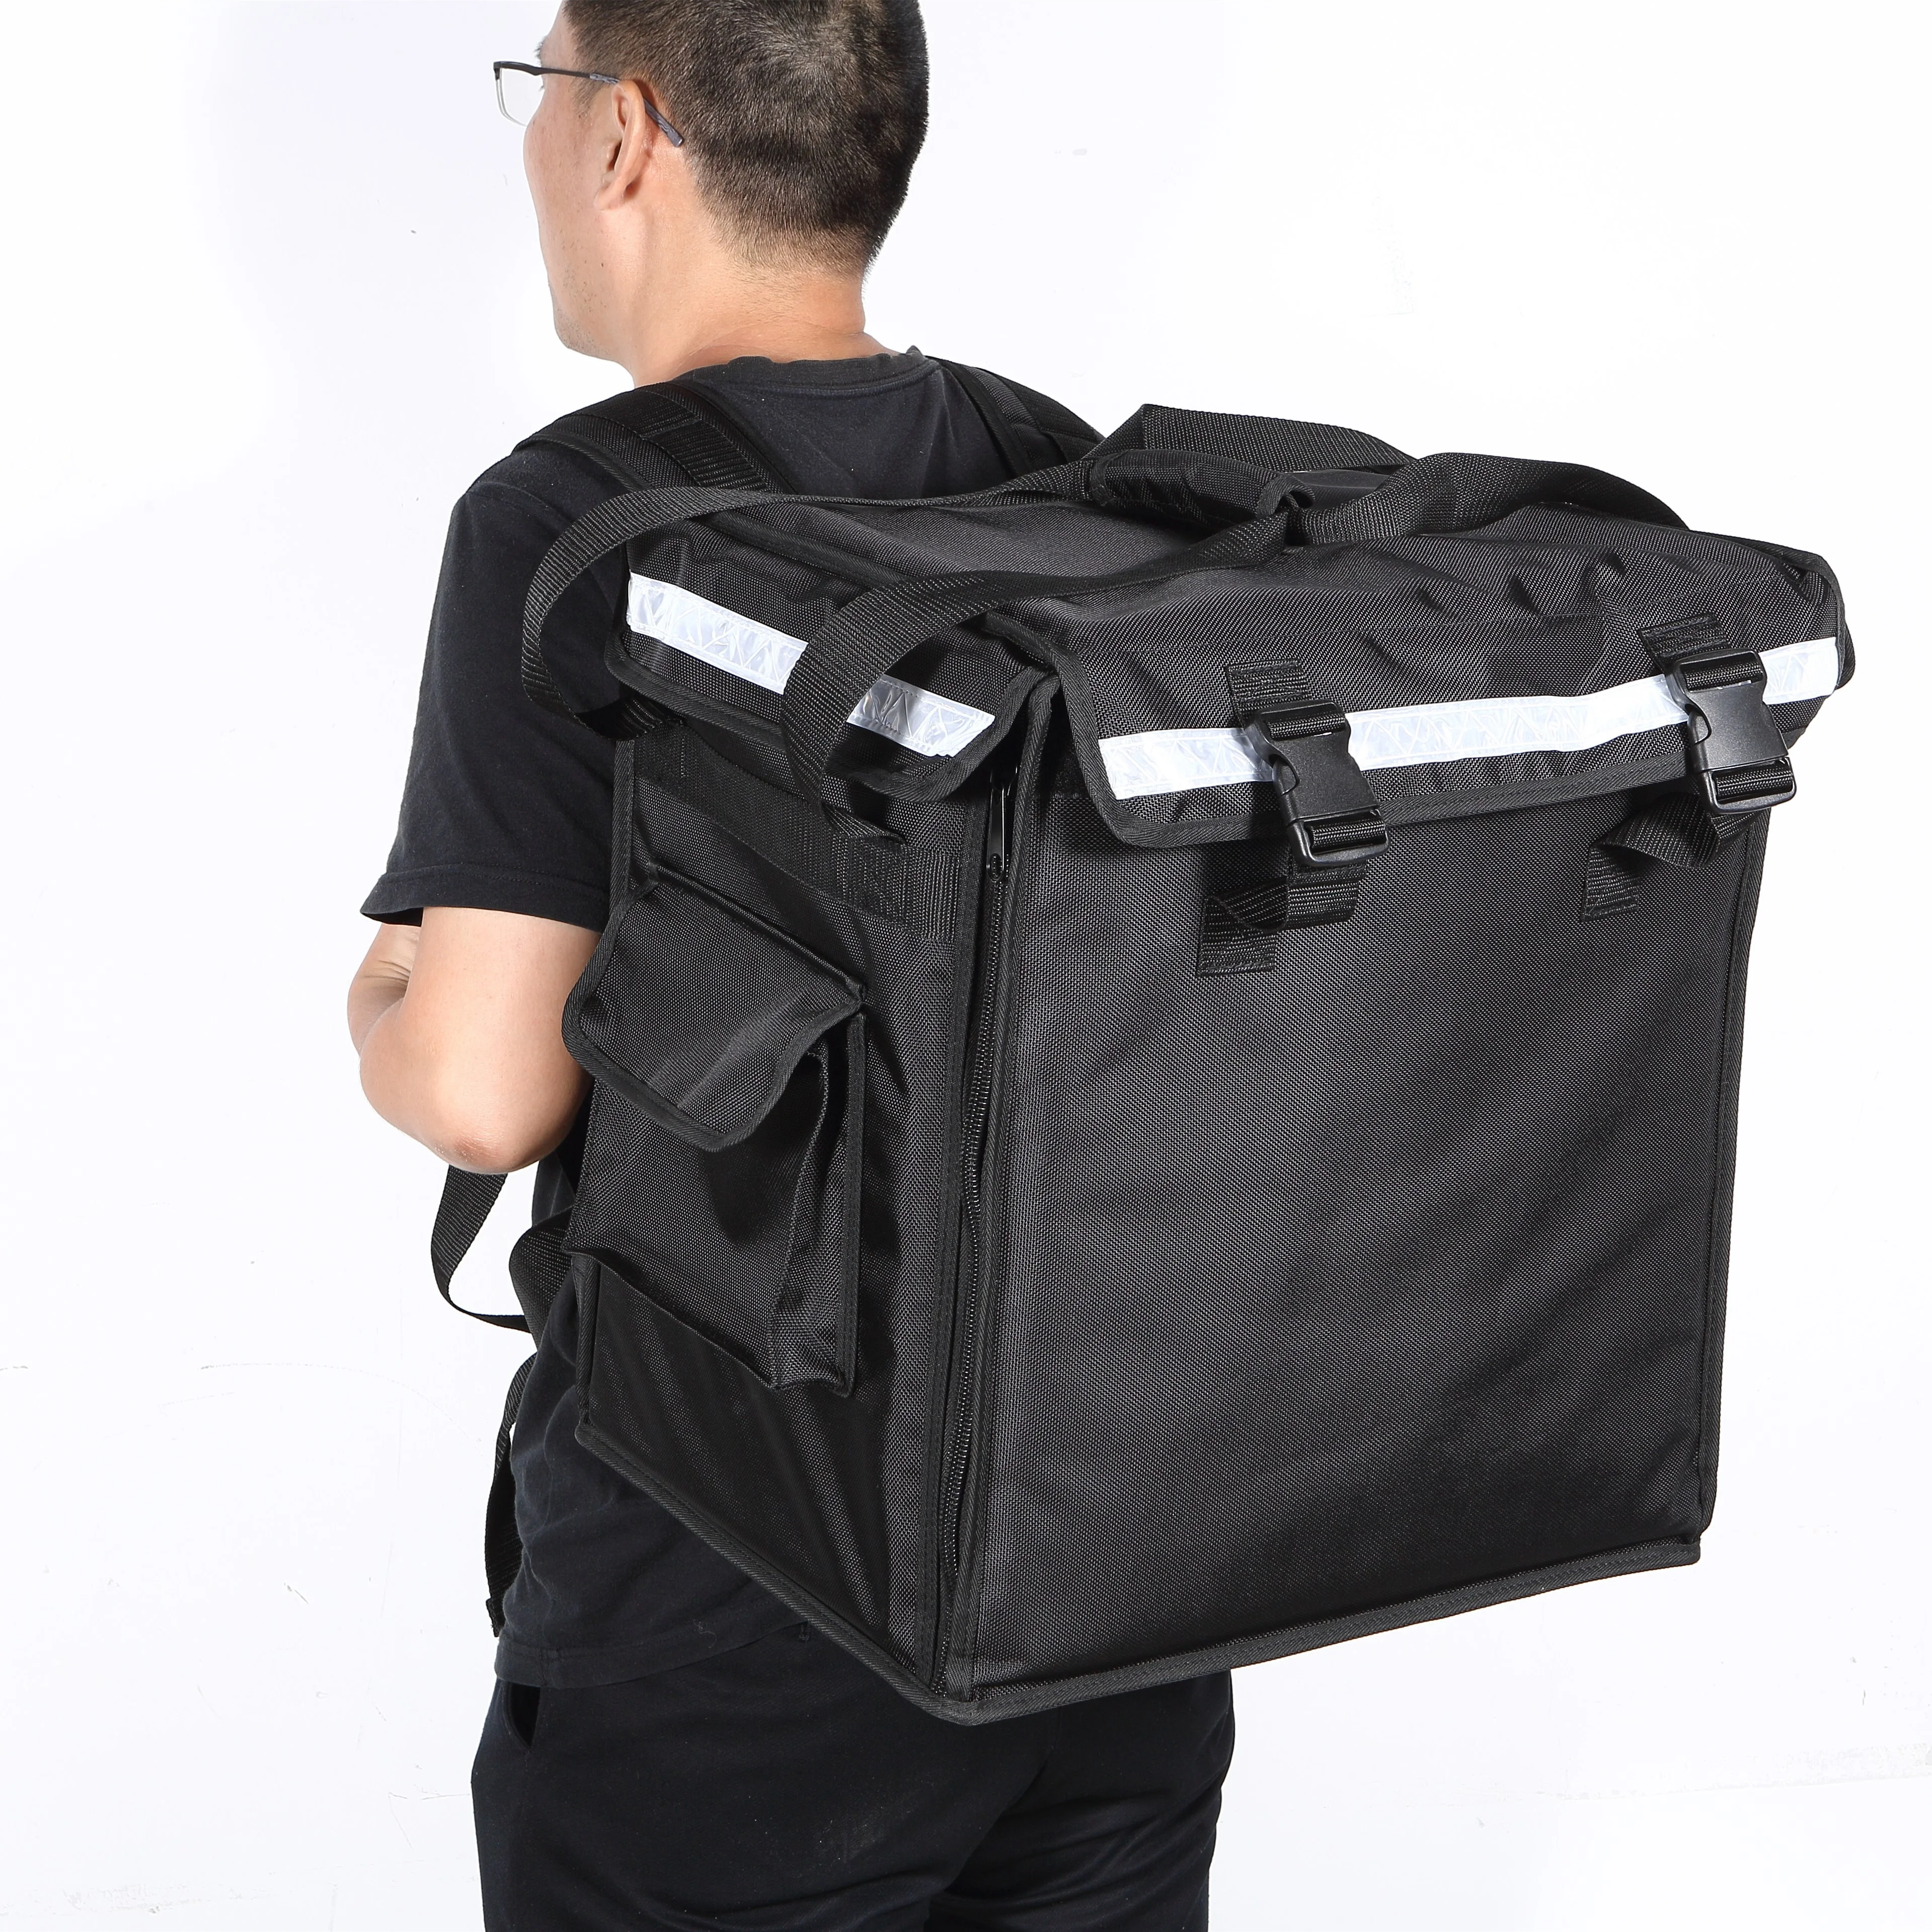 

Customized high quality large Capacity Durable Black Thermal Waterproof Cooler Backpack 65L delivery bag motorcycle